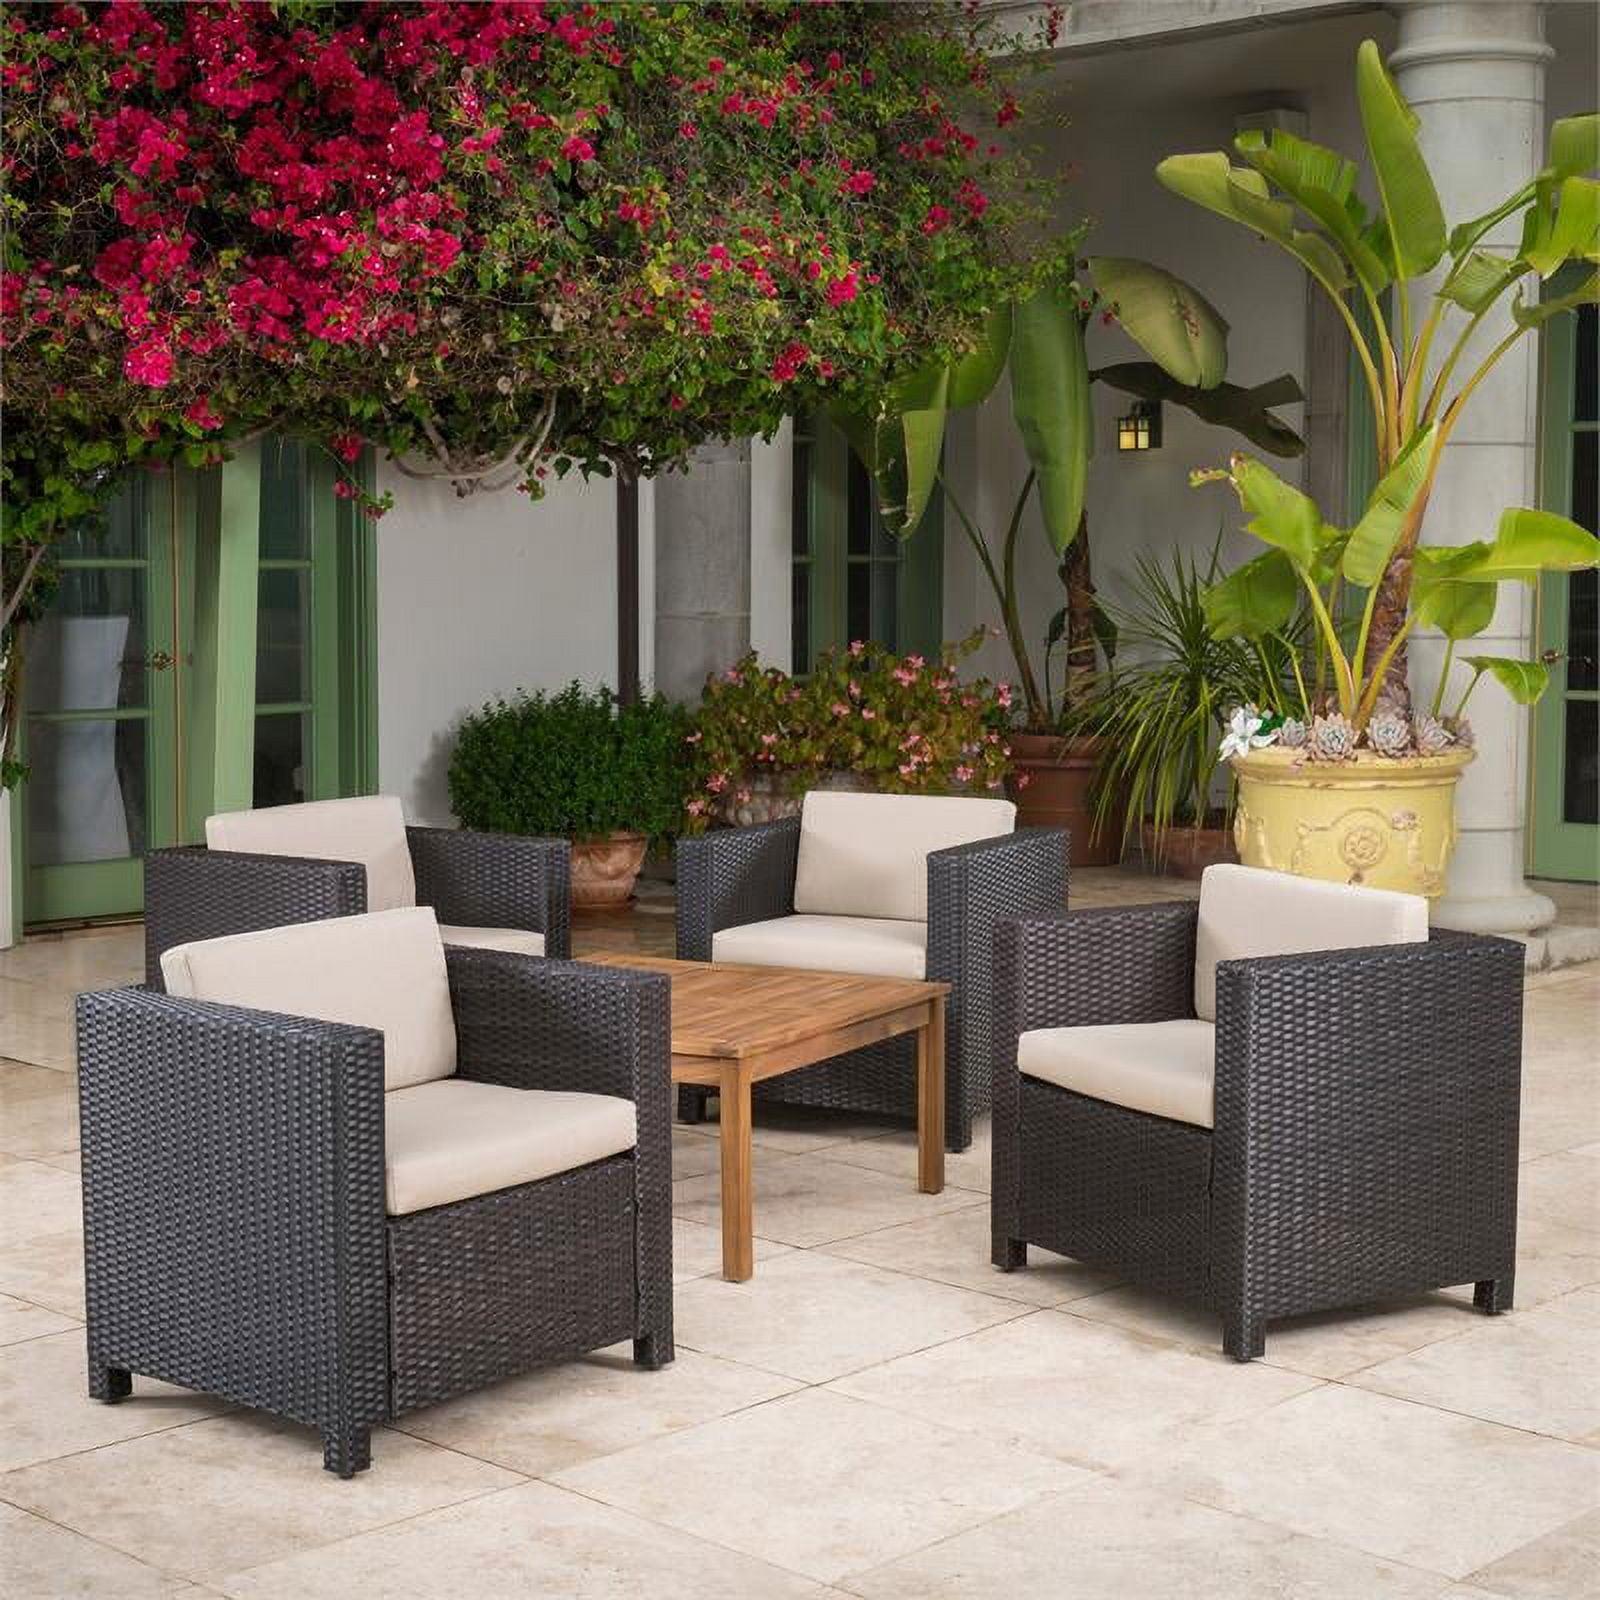 Modern 5-Piece Outdoor Club Chair Set with Cushions in Brown and Beige